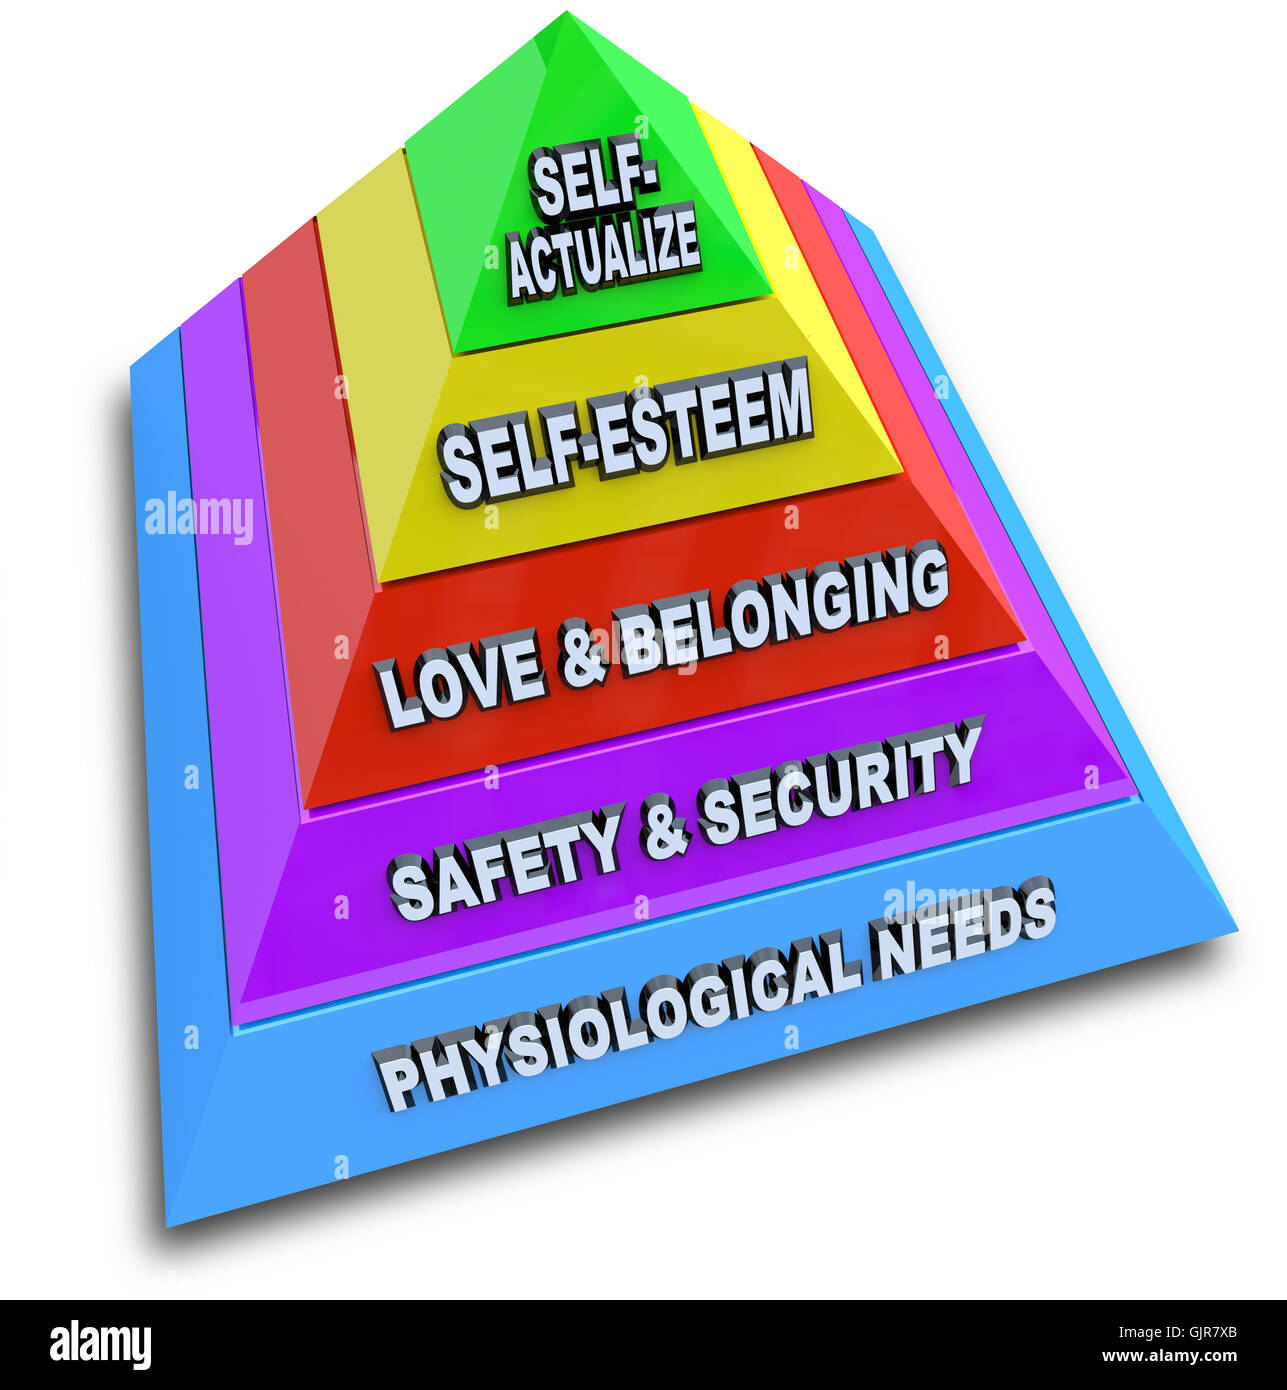 Hierarchy of Needs Pyramid - Maslow's Theory Illustrated Stock Photo